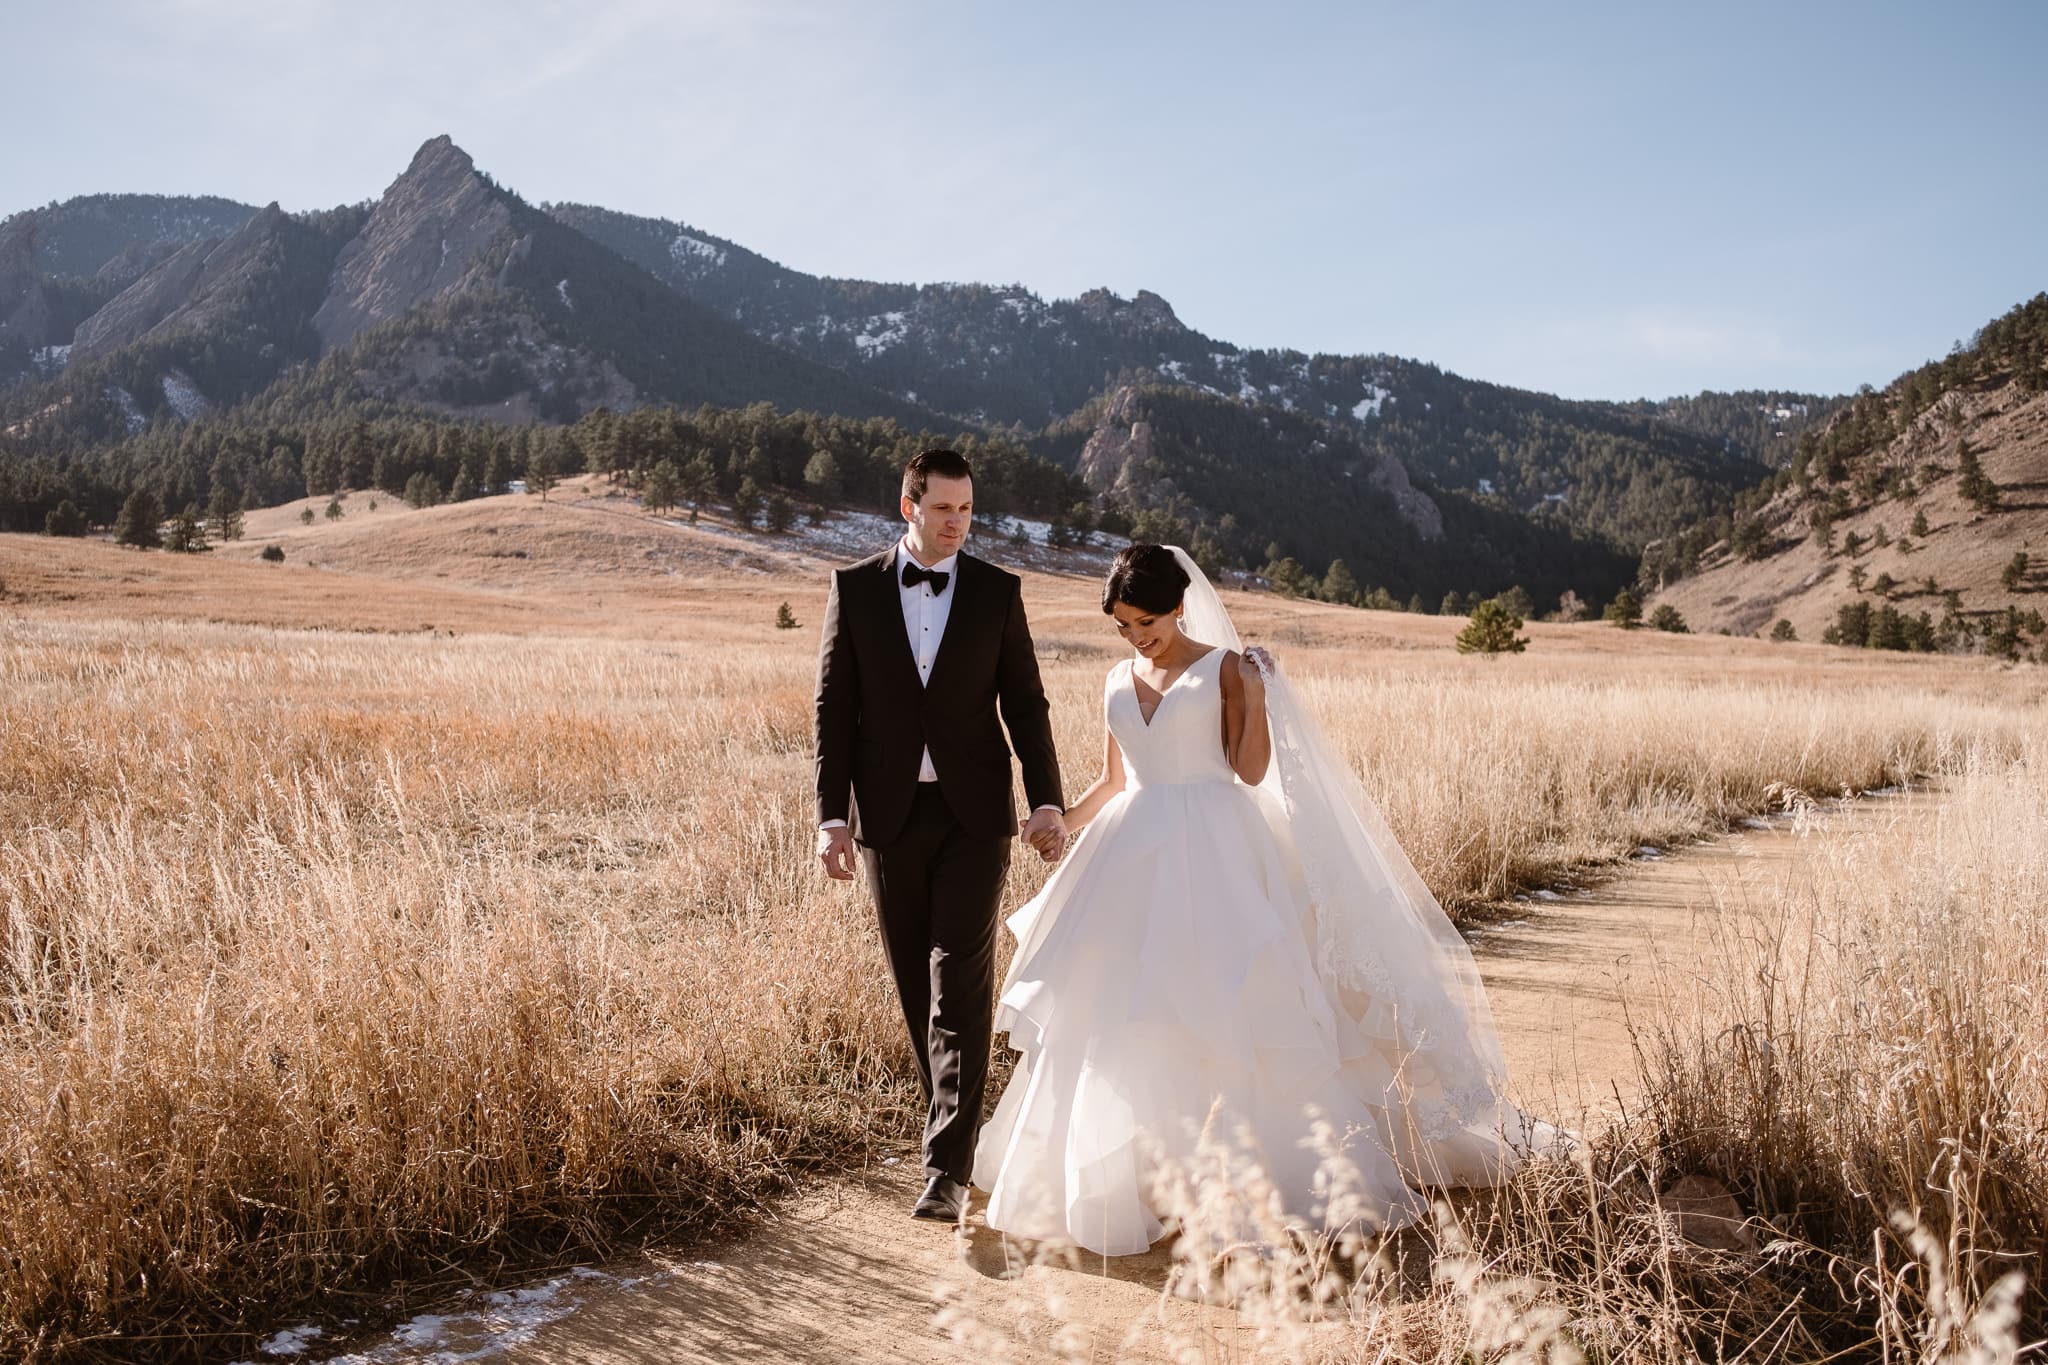 Bride and groom portraits at Chautauqua with views of the Flatirons, Boulder wedding photographer, Colorado wedding photographer, St Julien wedding with mountain wedding photos